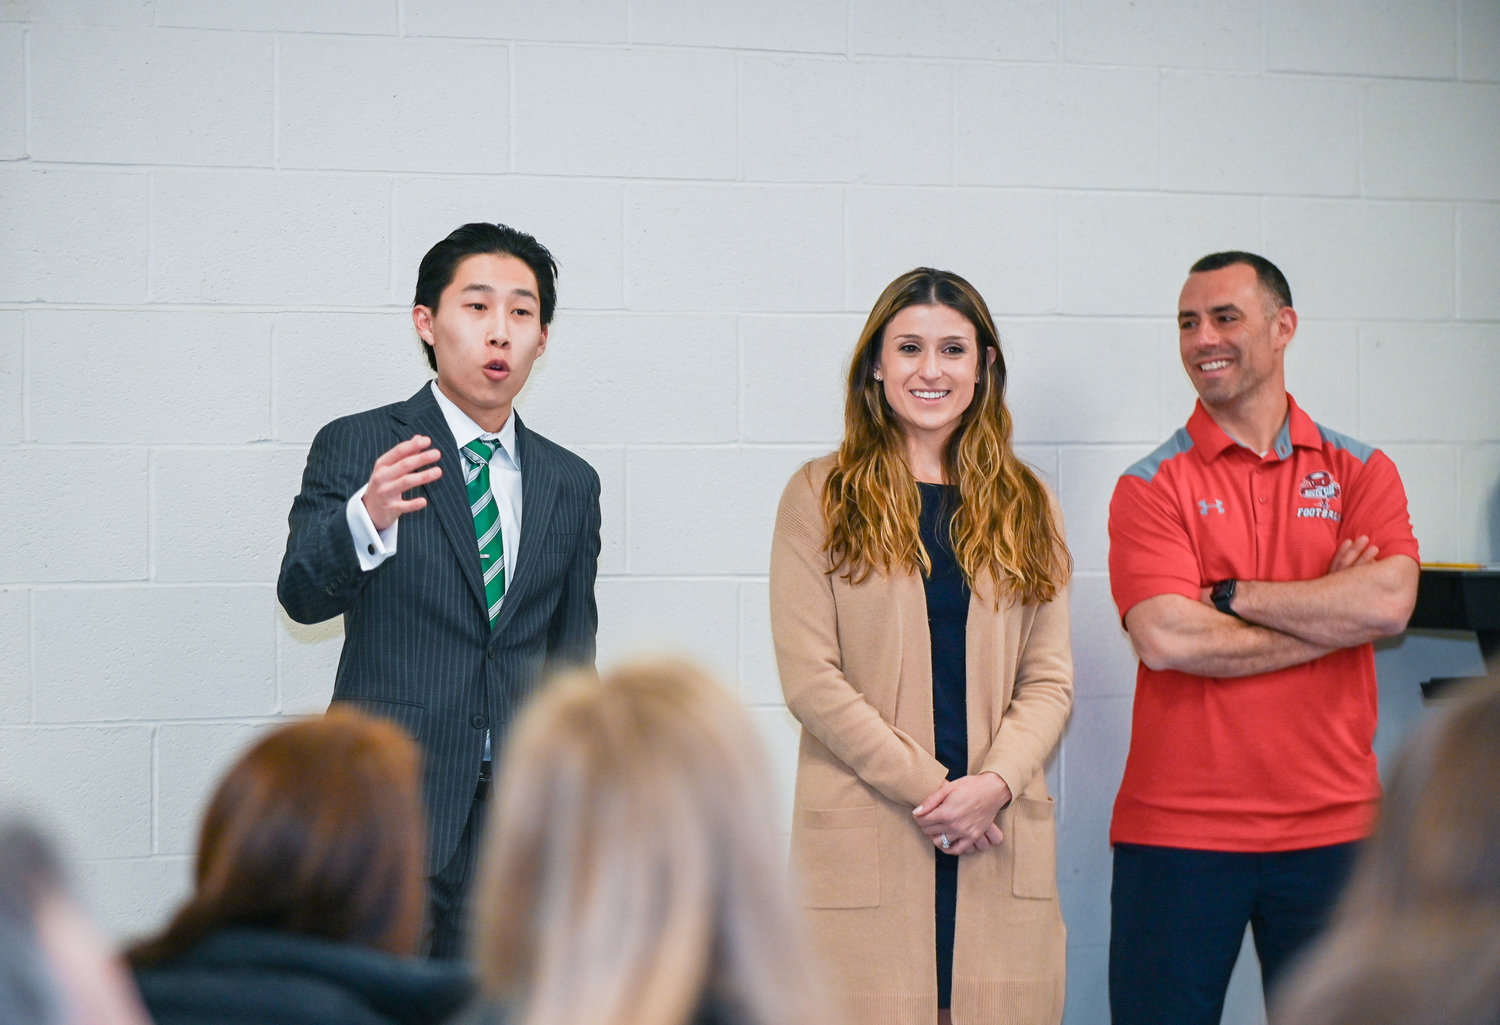 South Side 2018 graduate Joe MacNair, wearing tie, returned to talk about what he learned at the high school. With him were teachers Gina Kadar and Brian Manolakes.